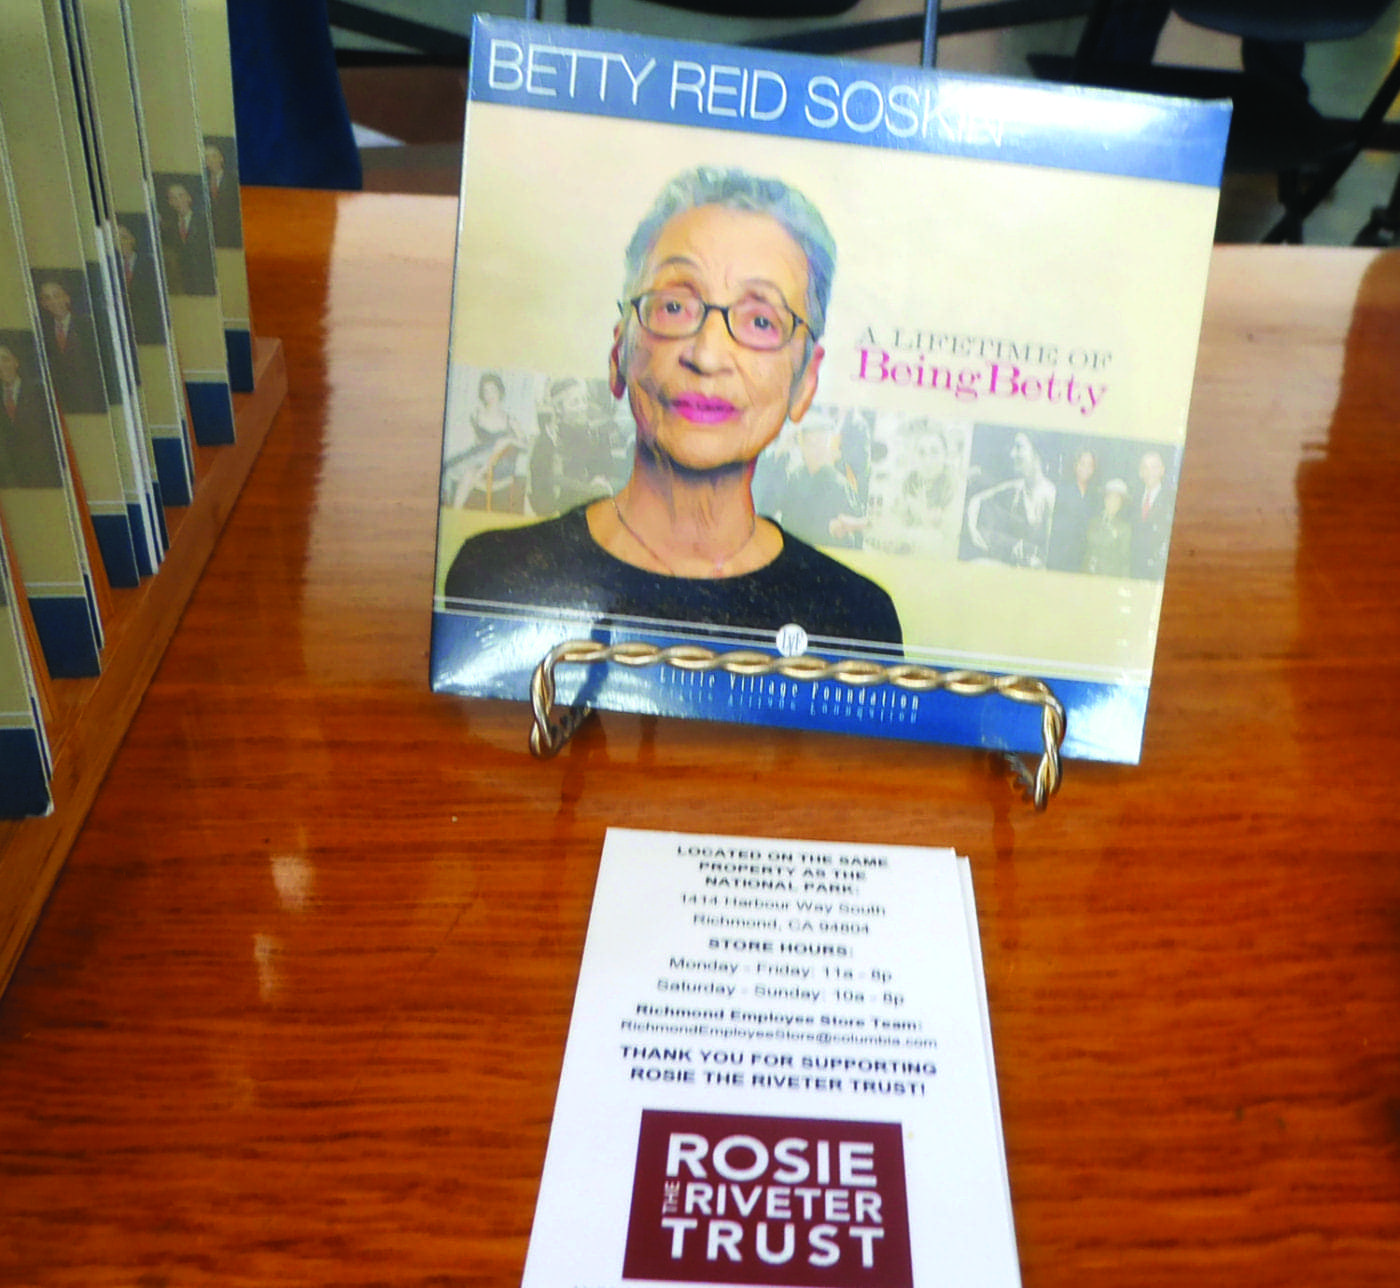 Betty-Reid-Soskin-100th-birthday-party-copy-1400x1288, Celebrating International Workers’ Day!, Culture Currents News & Views 